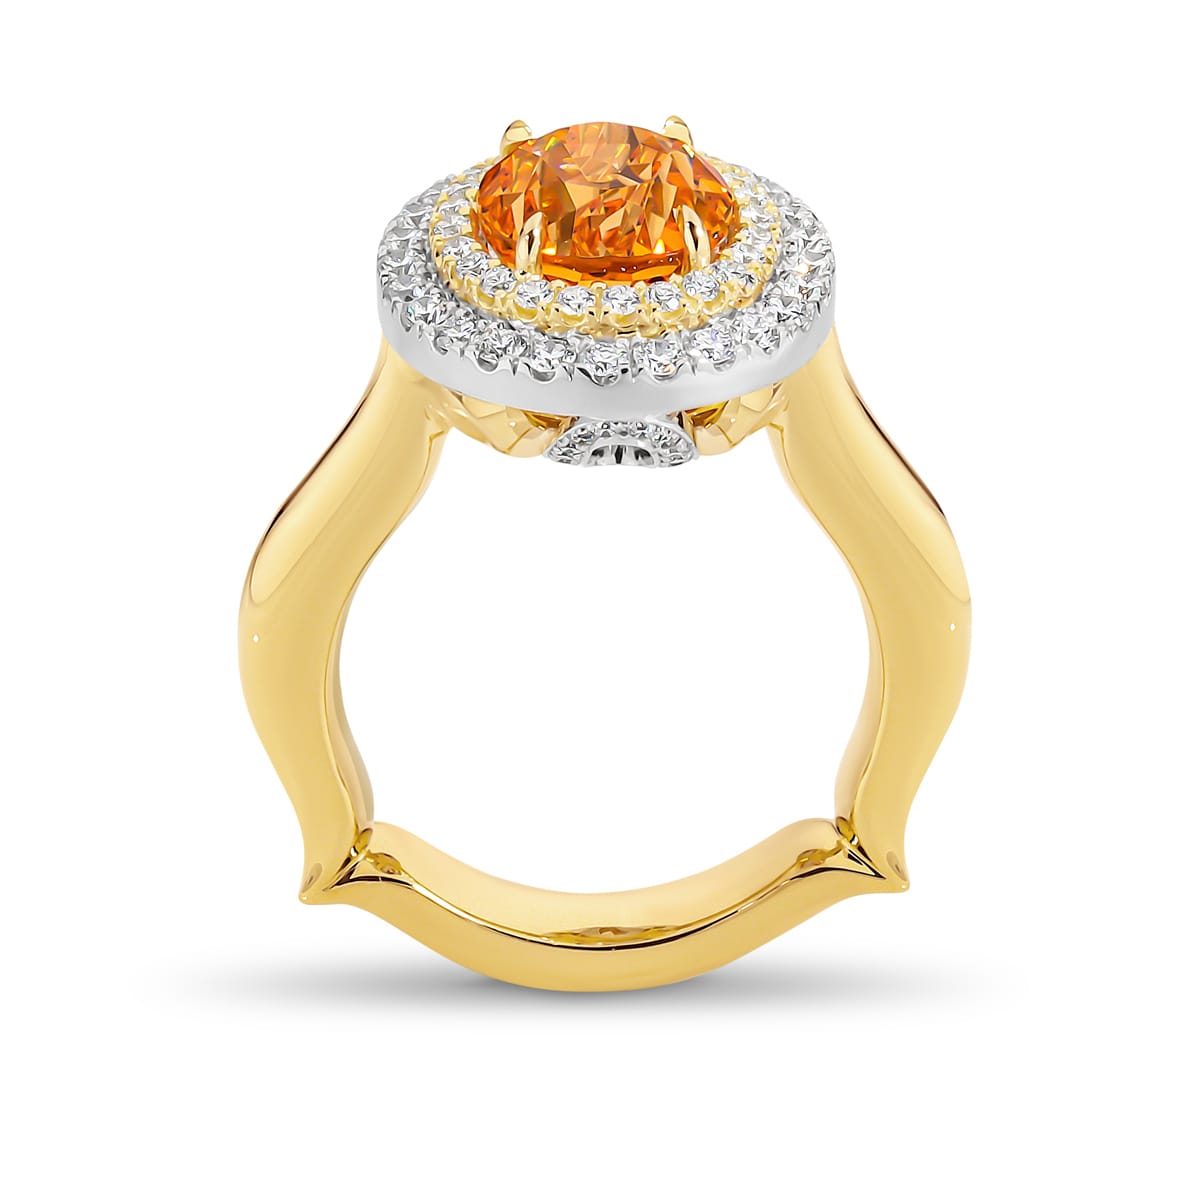 Aurelia features a rare 3.95 carat oval Mandarin garnet. Surrounding this centrepiece, Aurelia features a brilliant, gleaming double halo of white diamonds, crafted from 18 carat yellow and white gold. She was designed and handcrafted by LeGassick's Master Jewellers, Gold Coast, Australia.